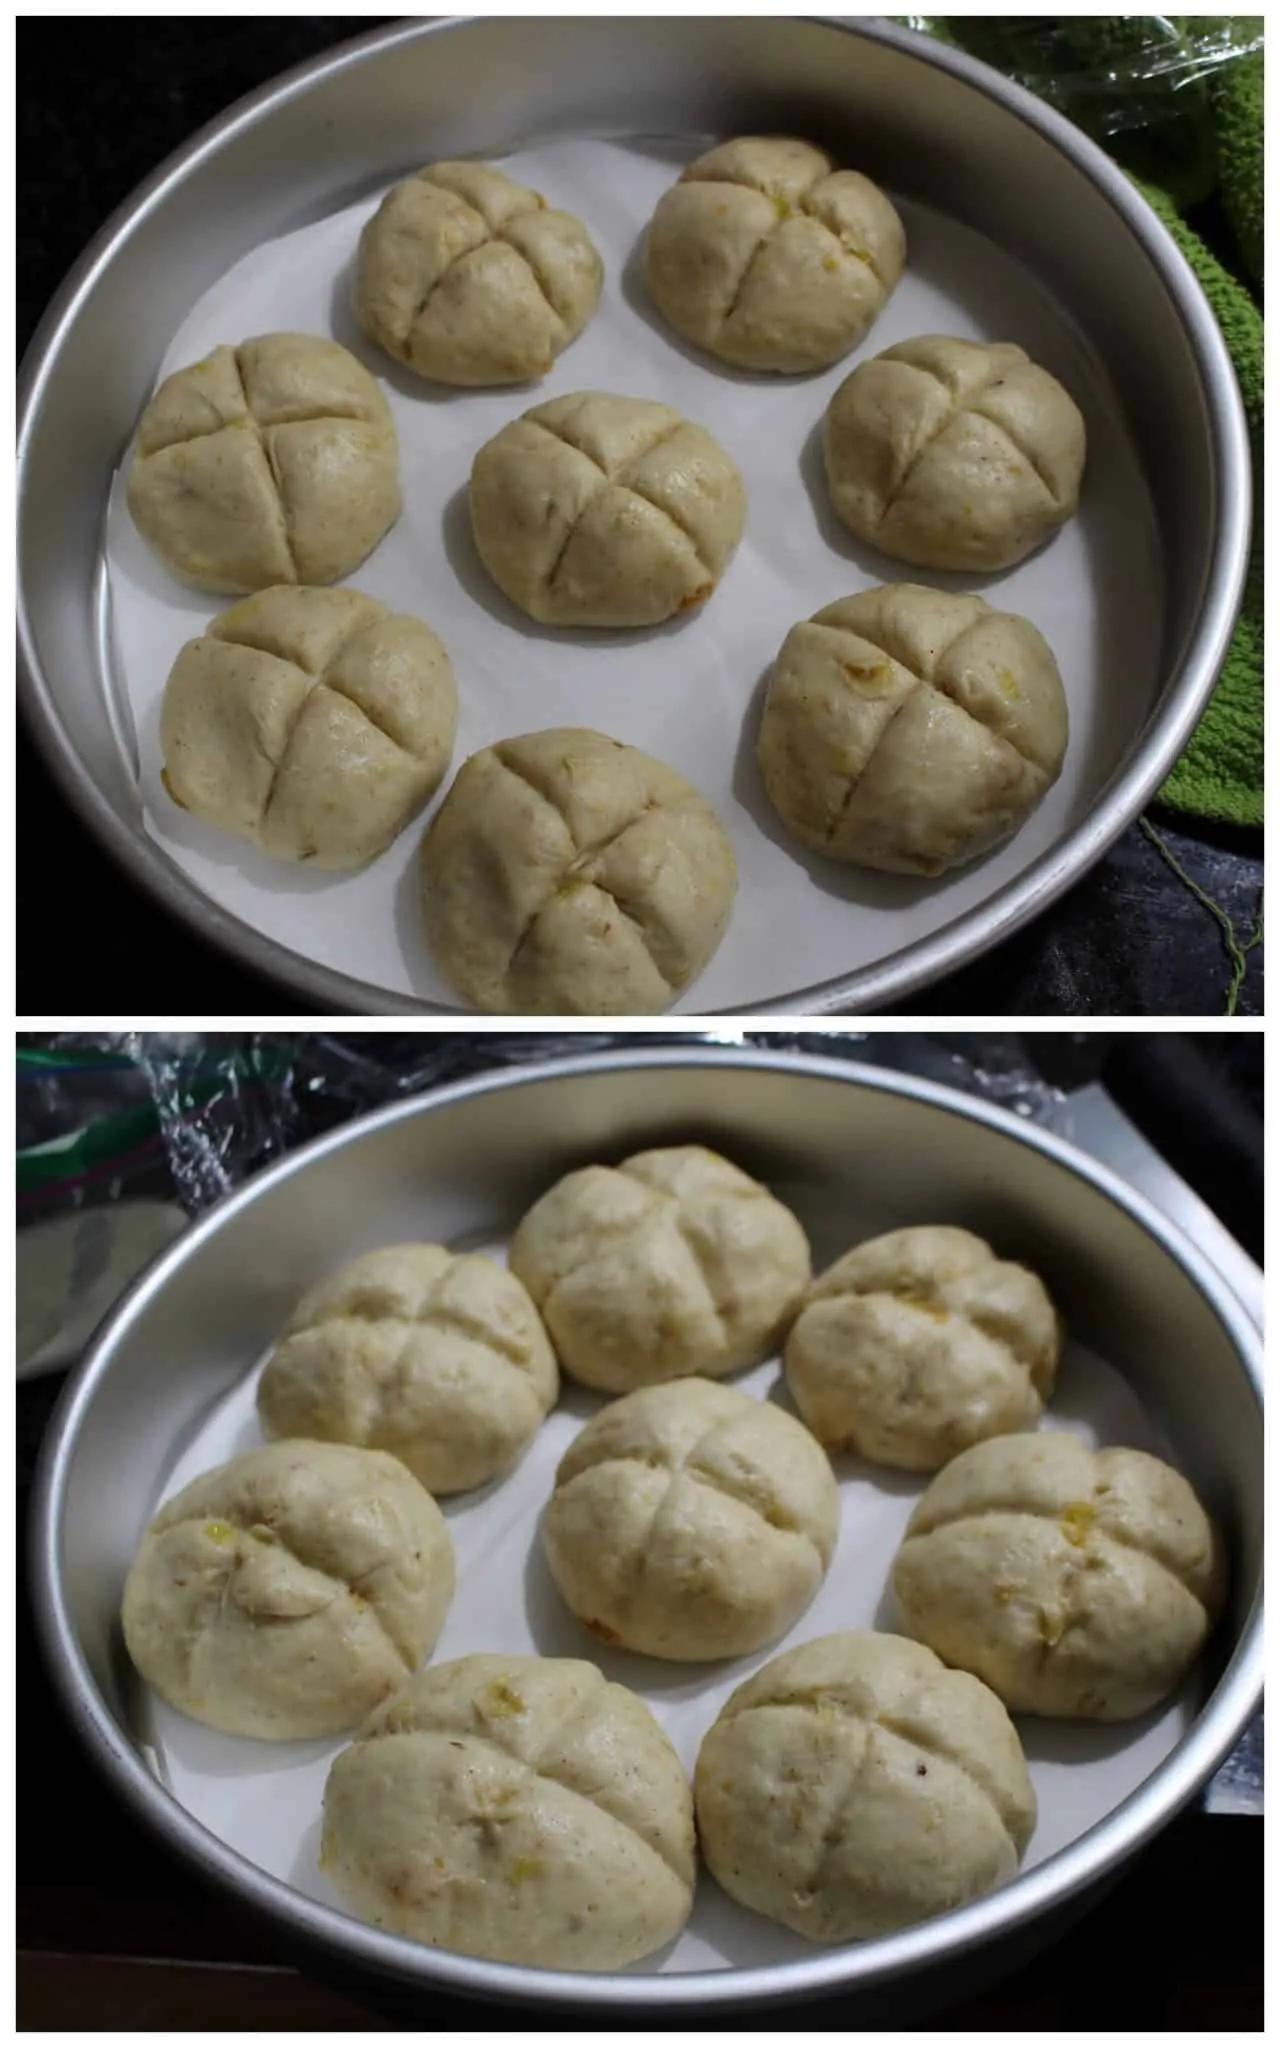 Dough proofing for hot cross buns